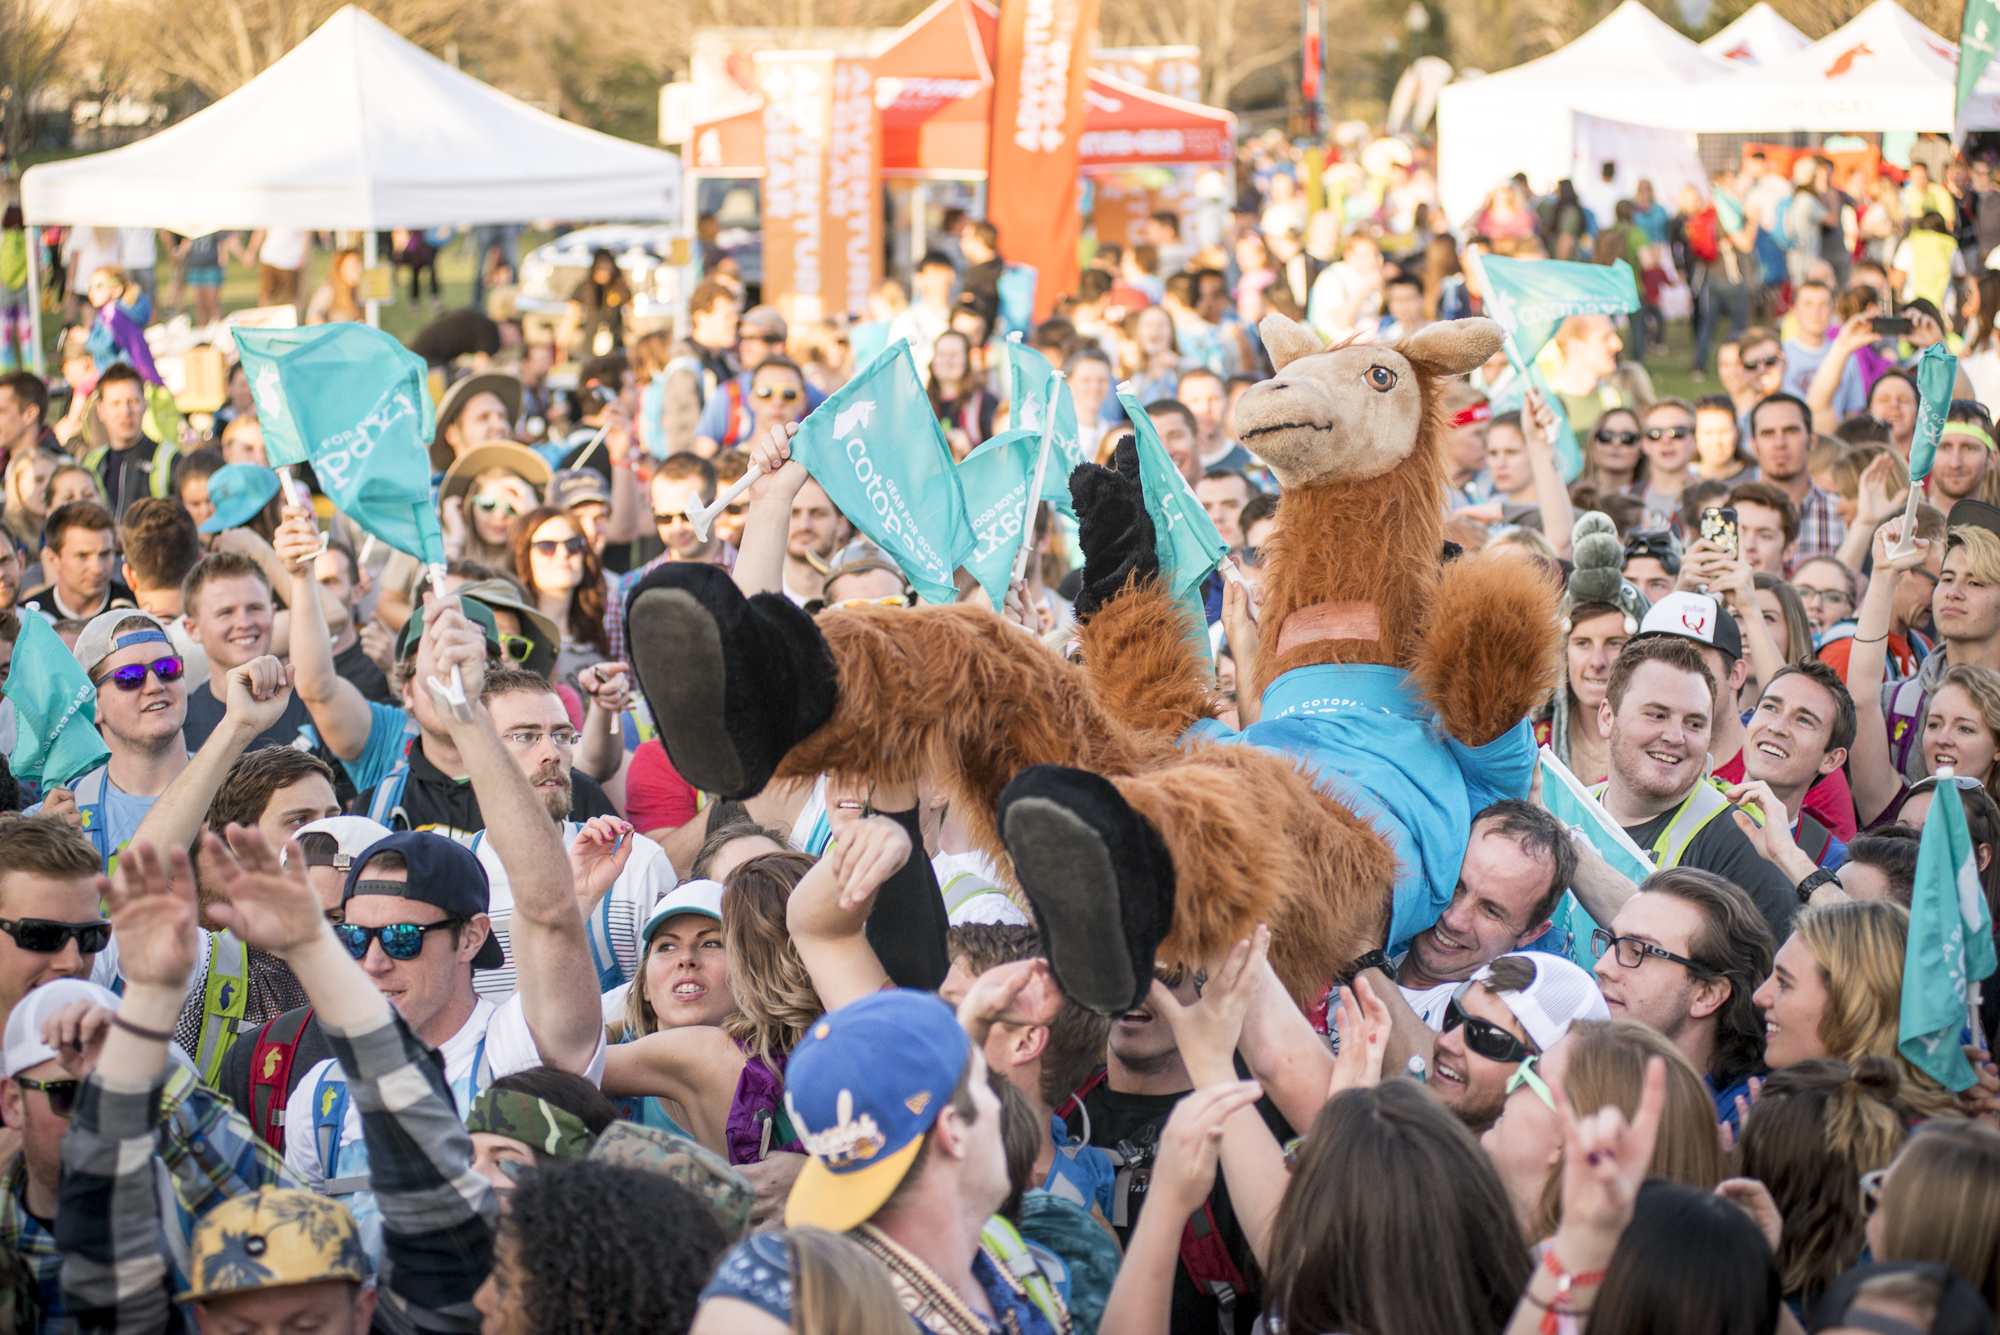 People carry a crowd-surfing llama at the Questival kick-off festival. (Ethan White)